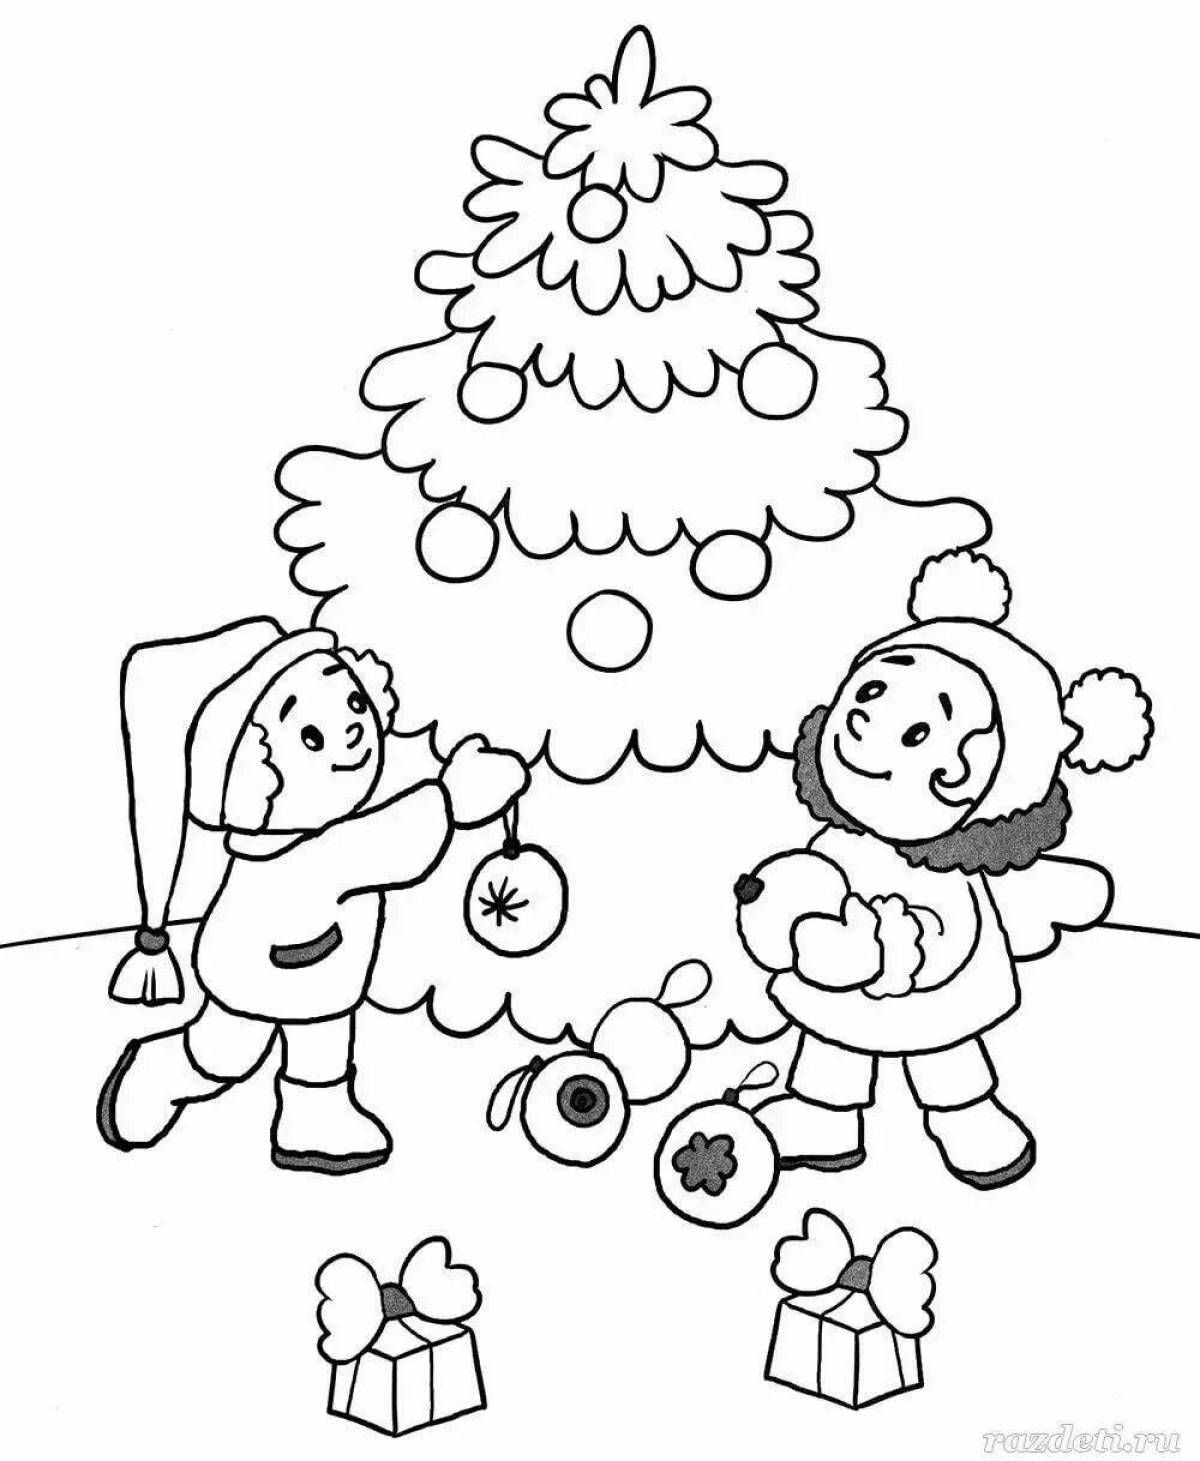 Christmas cheerful coloring book